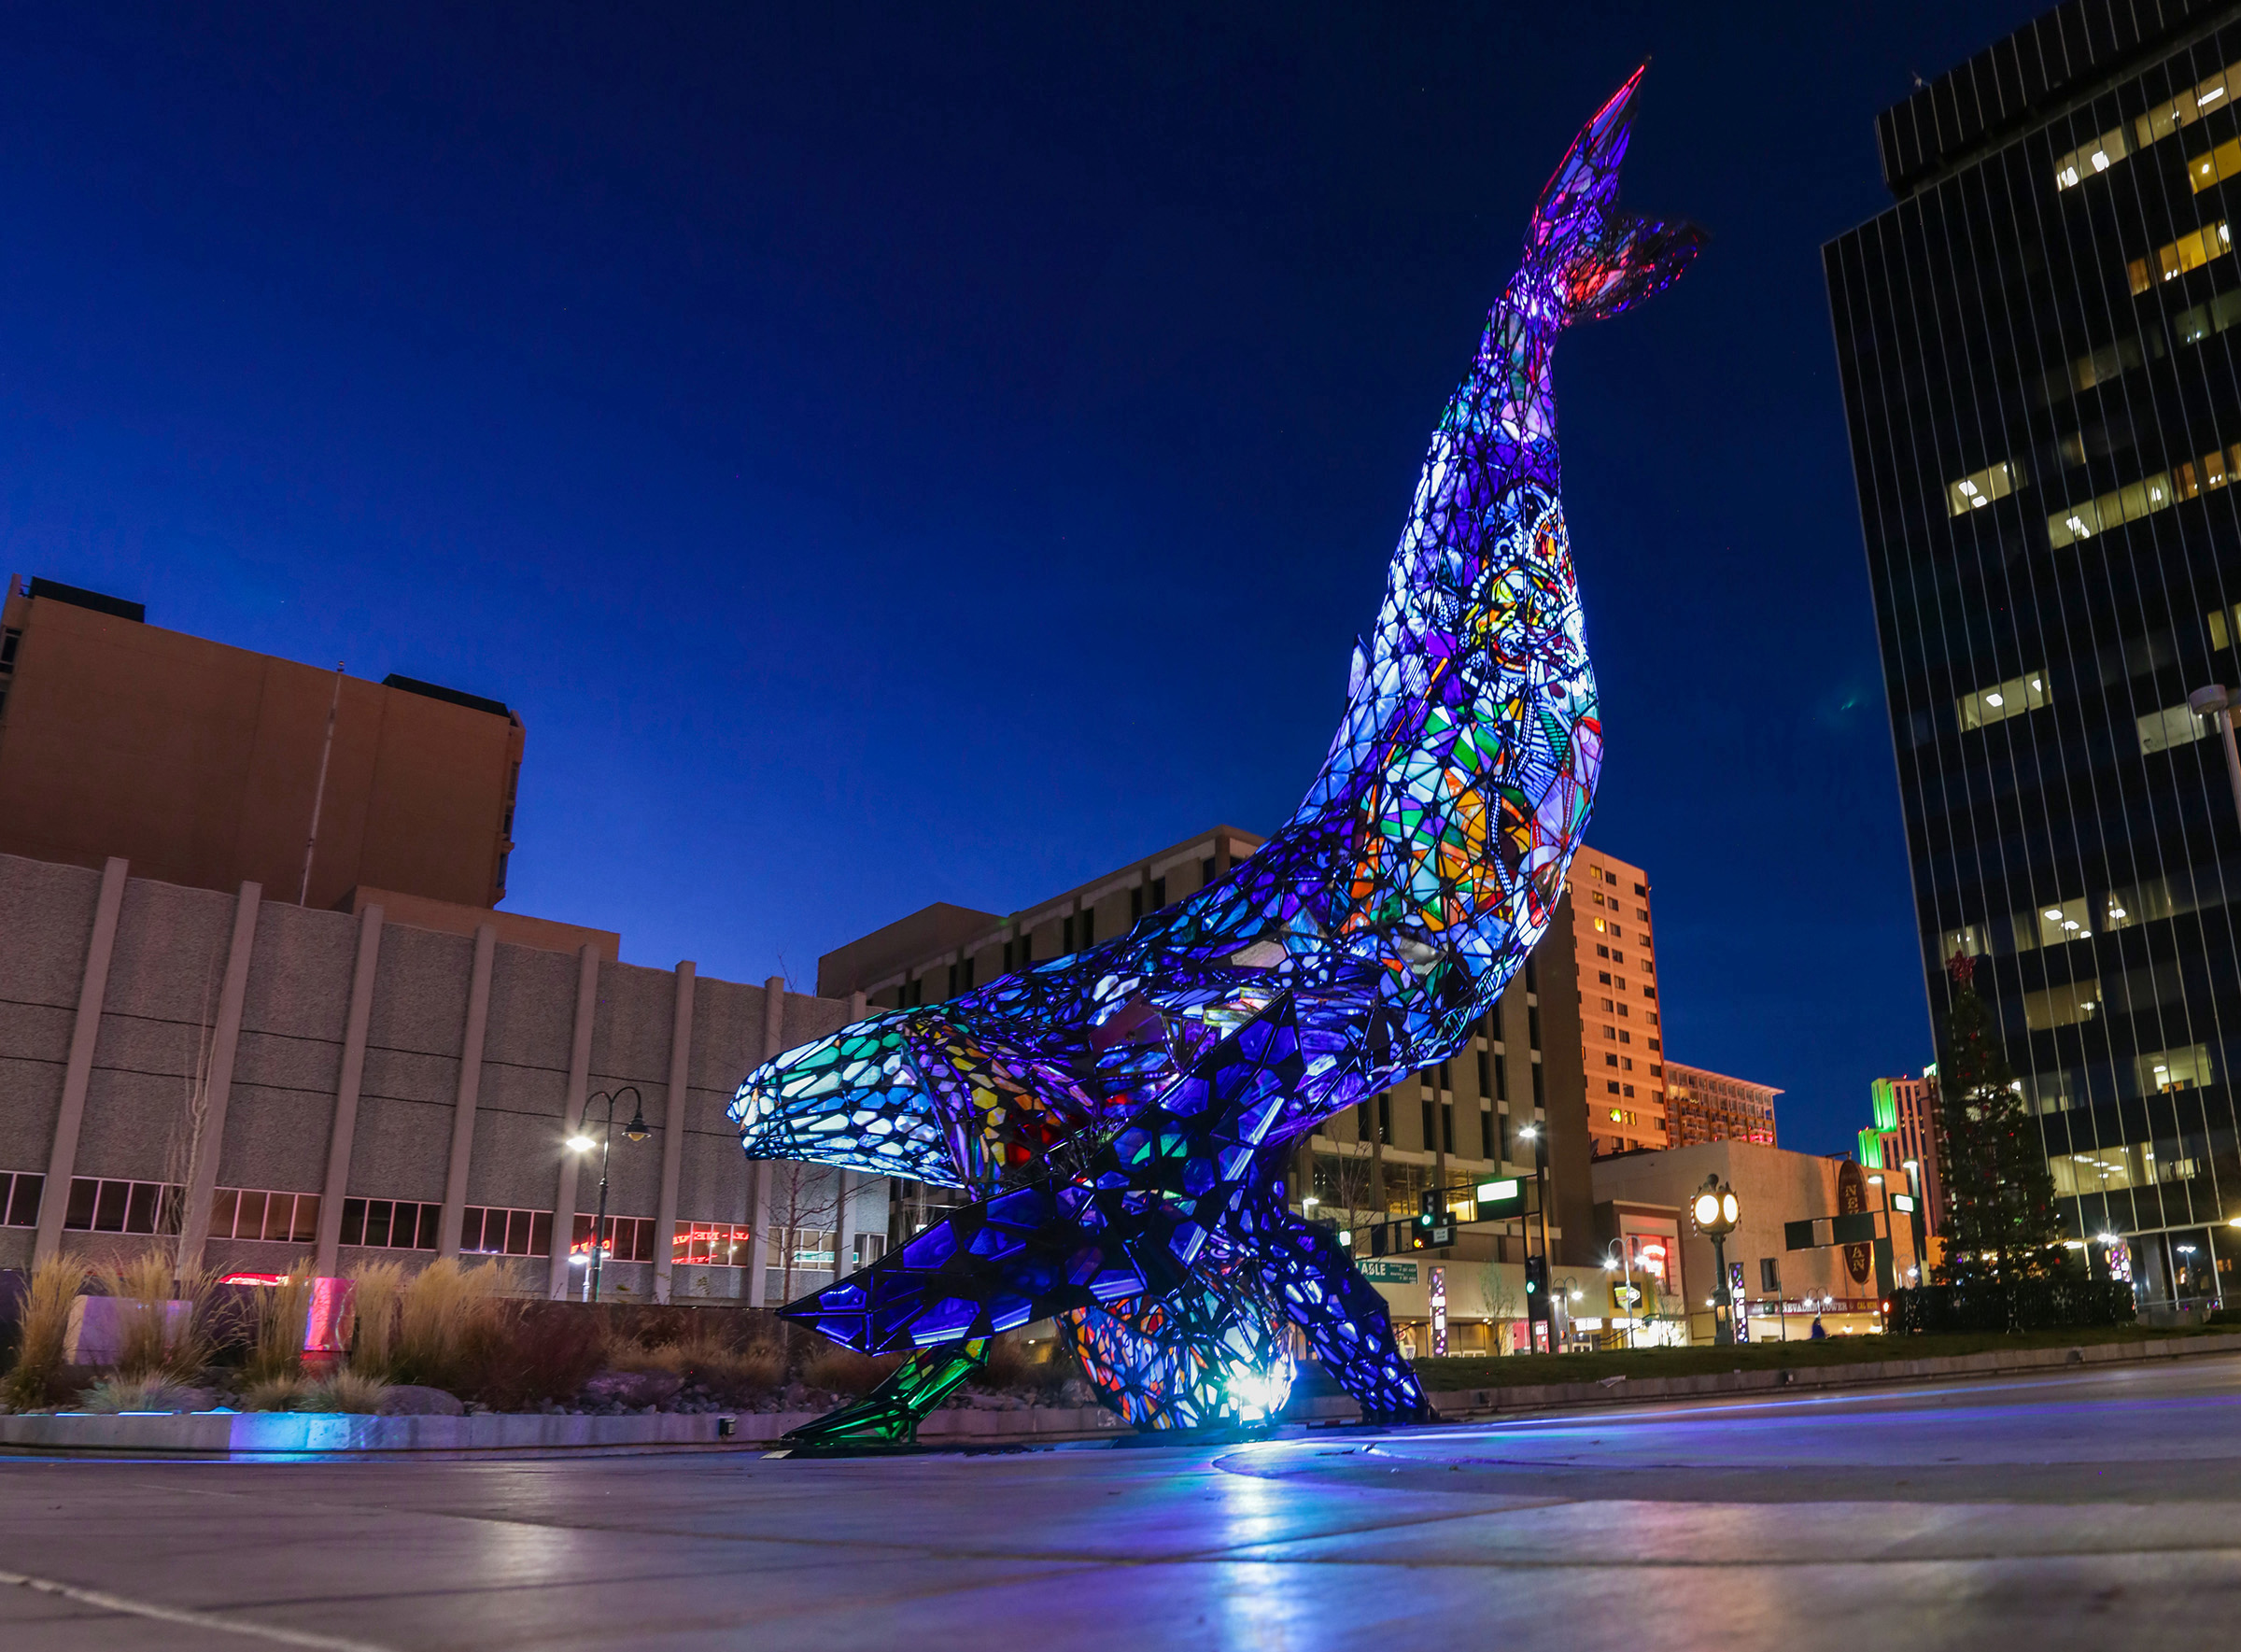 A large colorful blue whale sculpture placed outside in front of a building in the city.